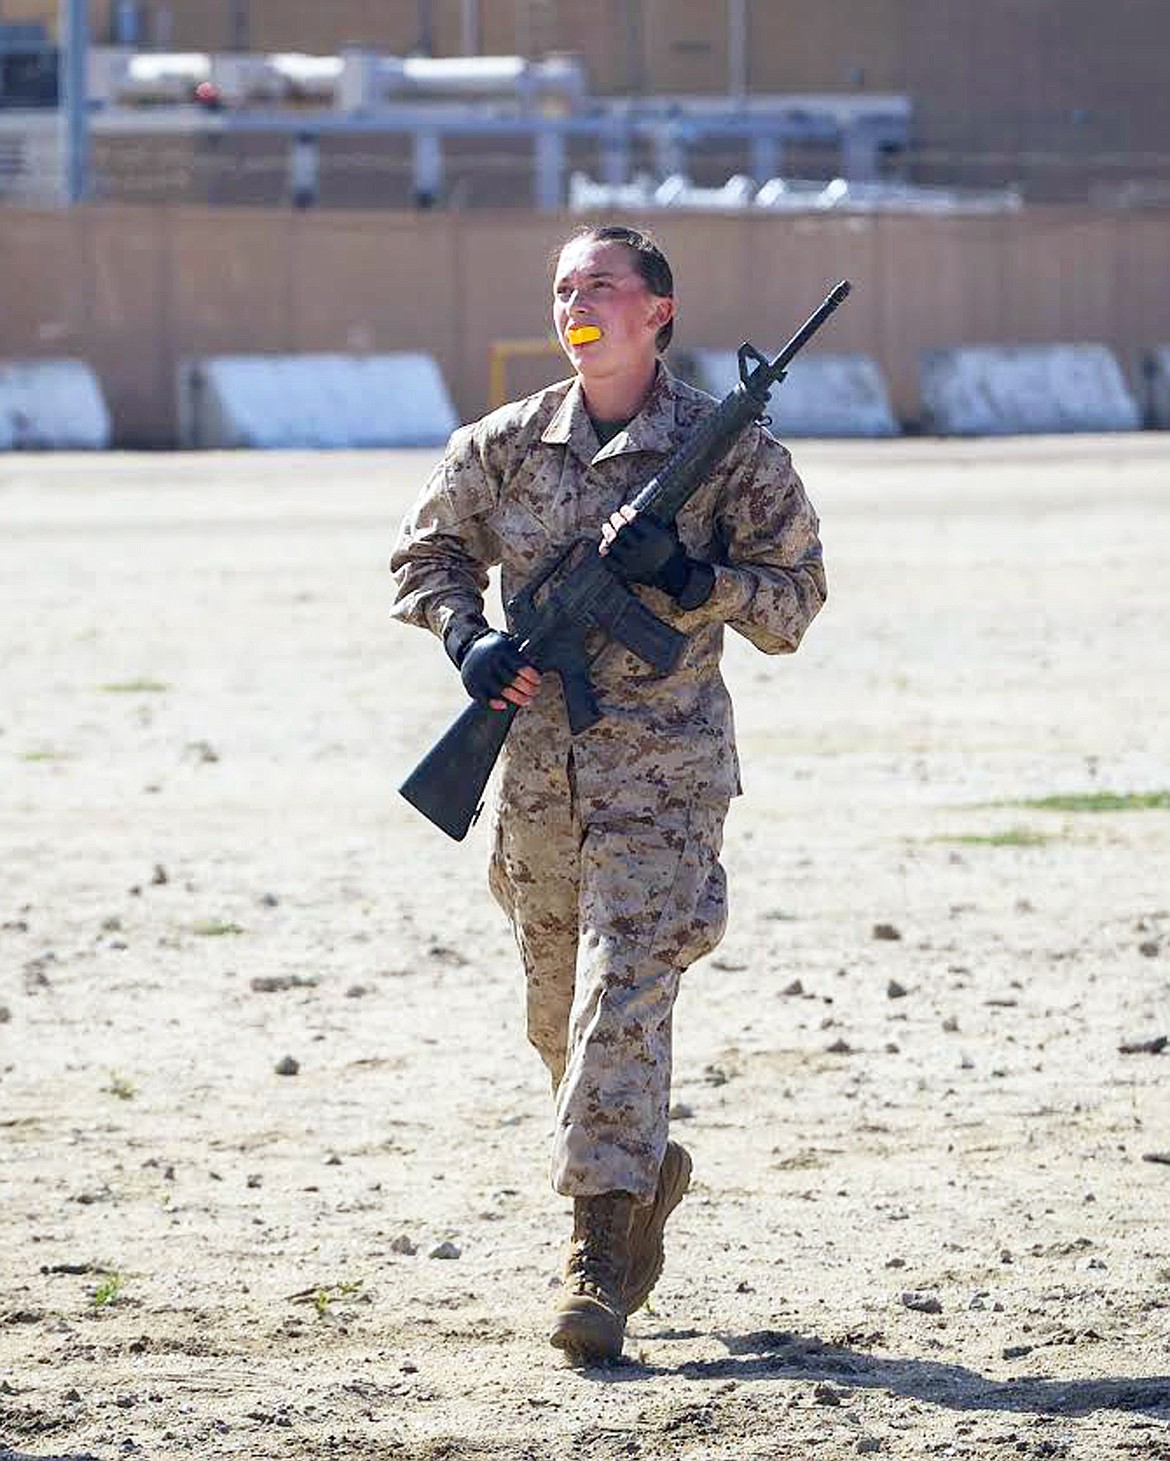 Lydia Eitel in action at the Marines boot camp on the West Coast.